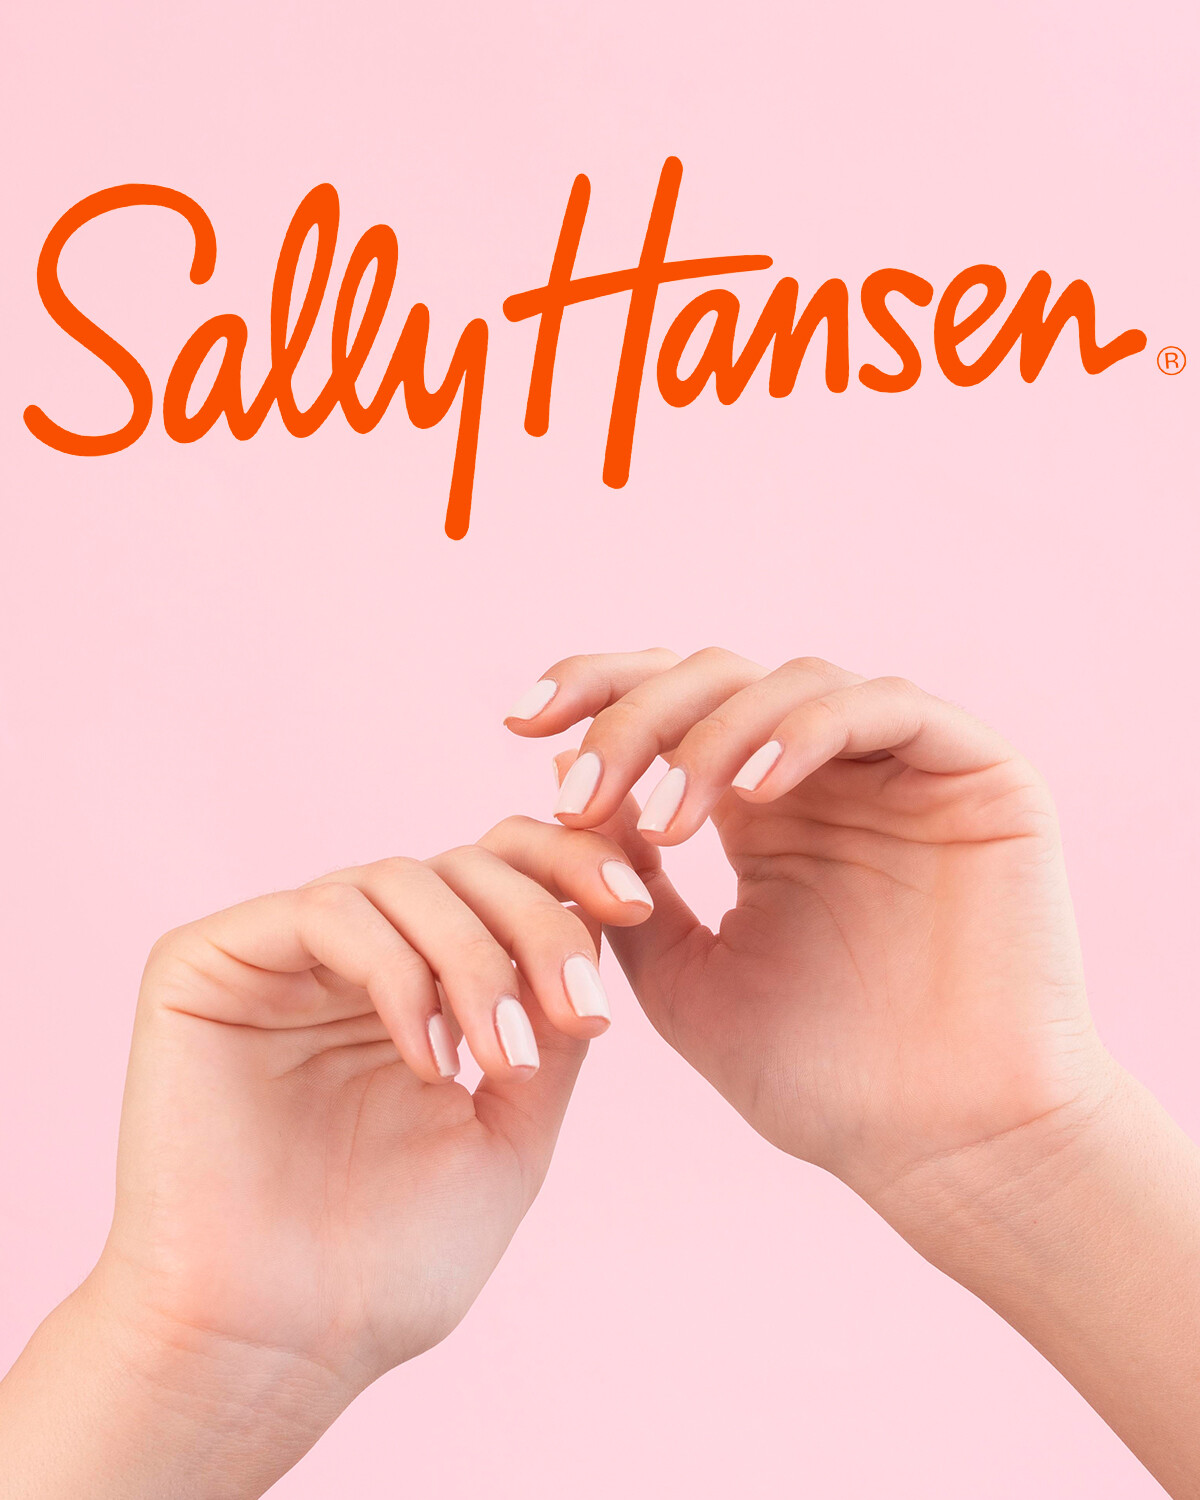 Amazon.com : Sally Hansen Nail Treatment Miracle Nail Thickener, 0.45 Fl Oz  (Pack of 2) : Beauty & Personal Care